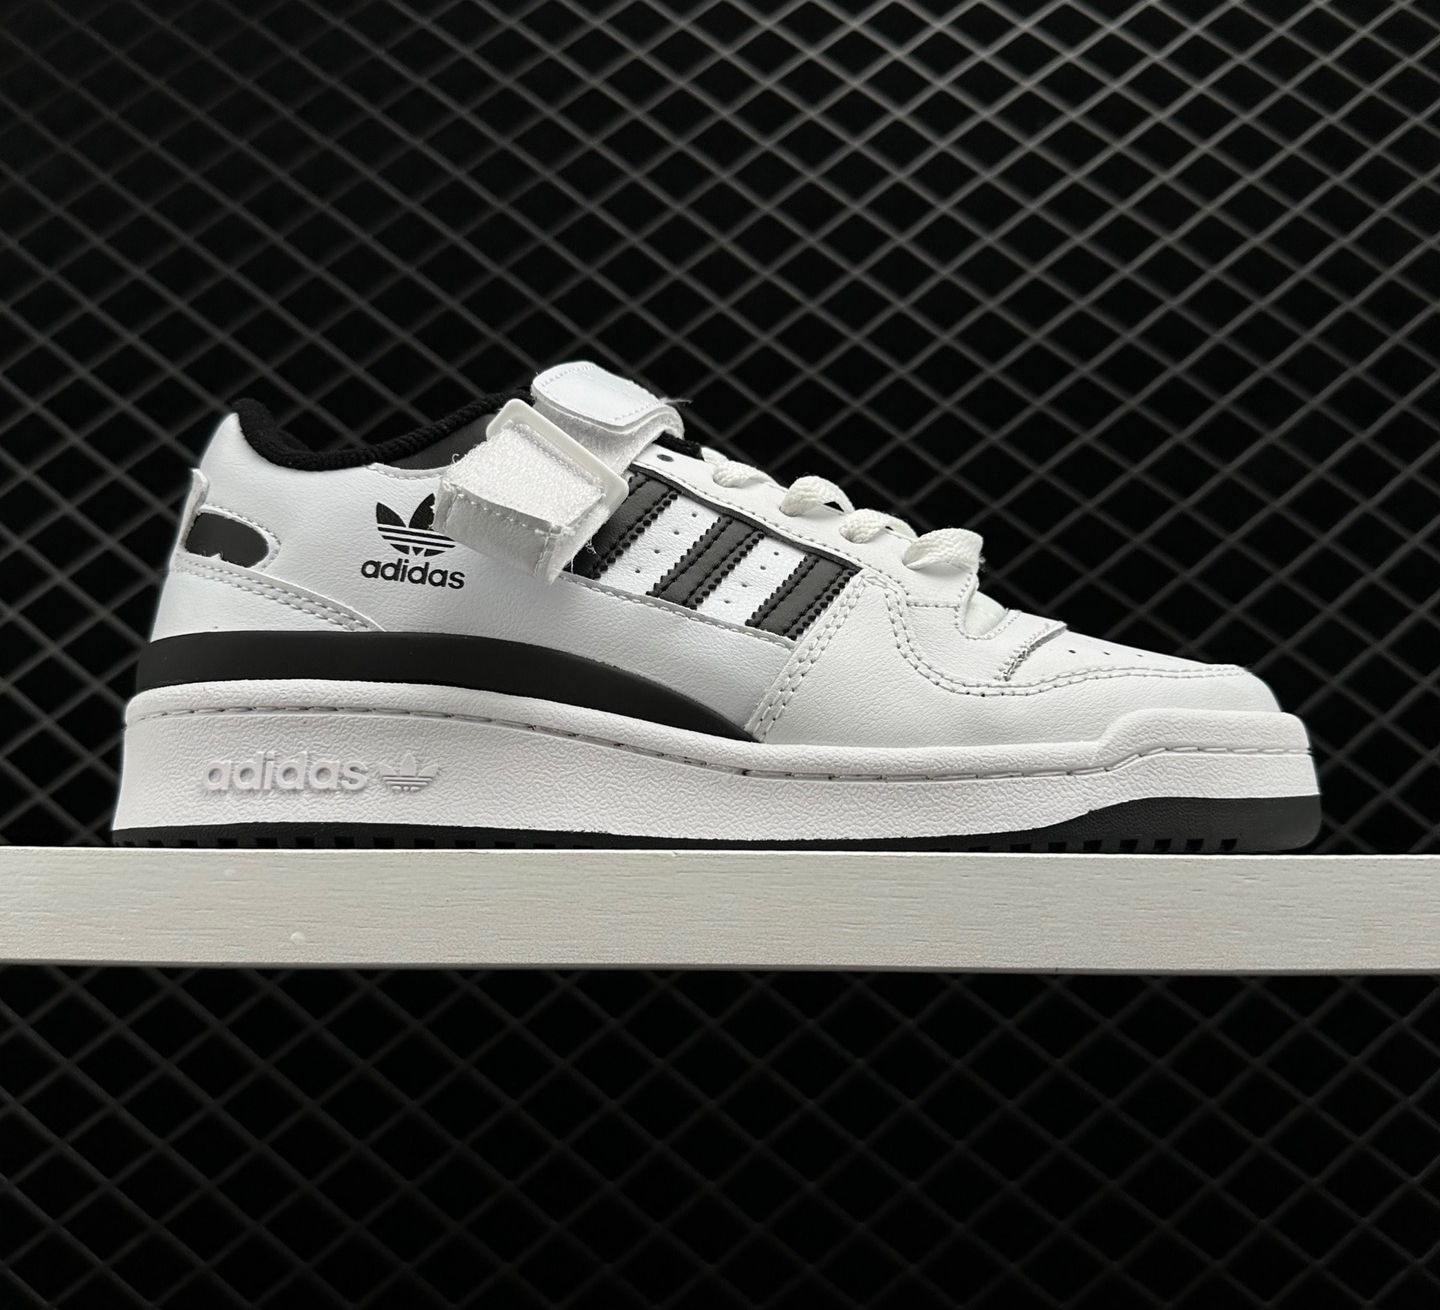 Adidas Forum Low 'White Black' FY7757 - Classic Sneakers for Timeless Style